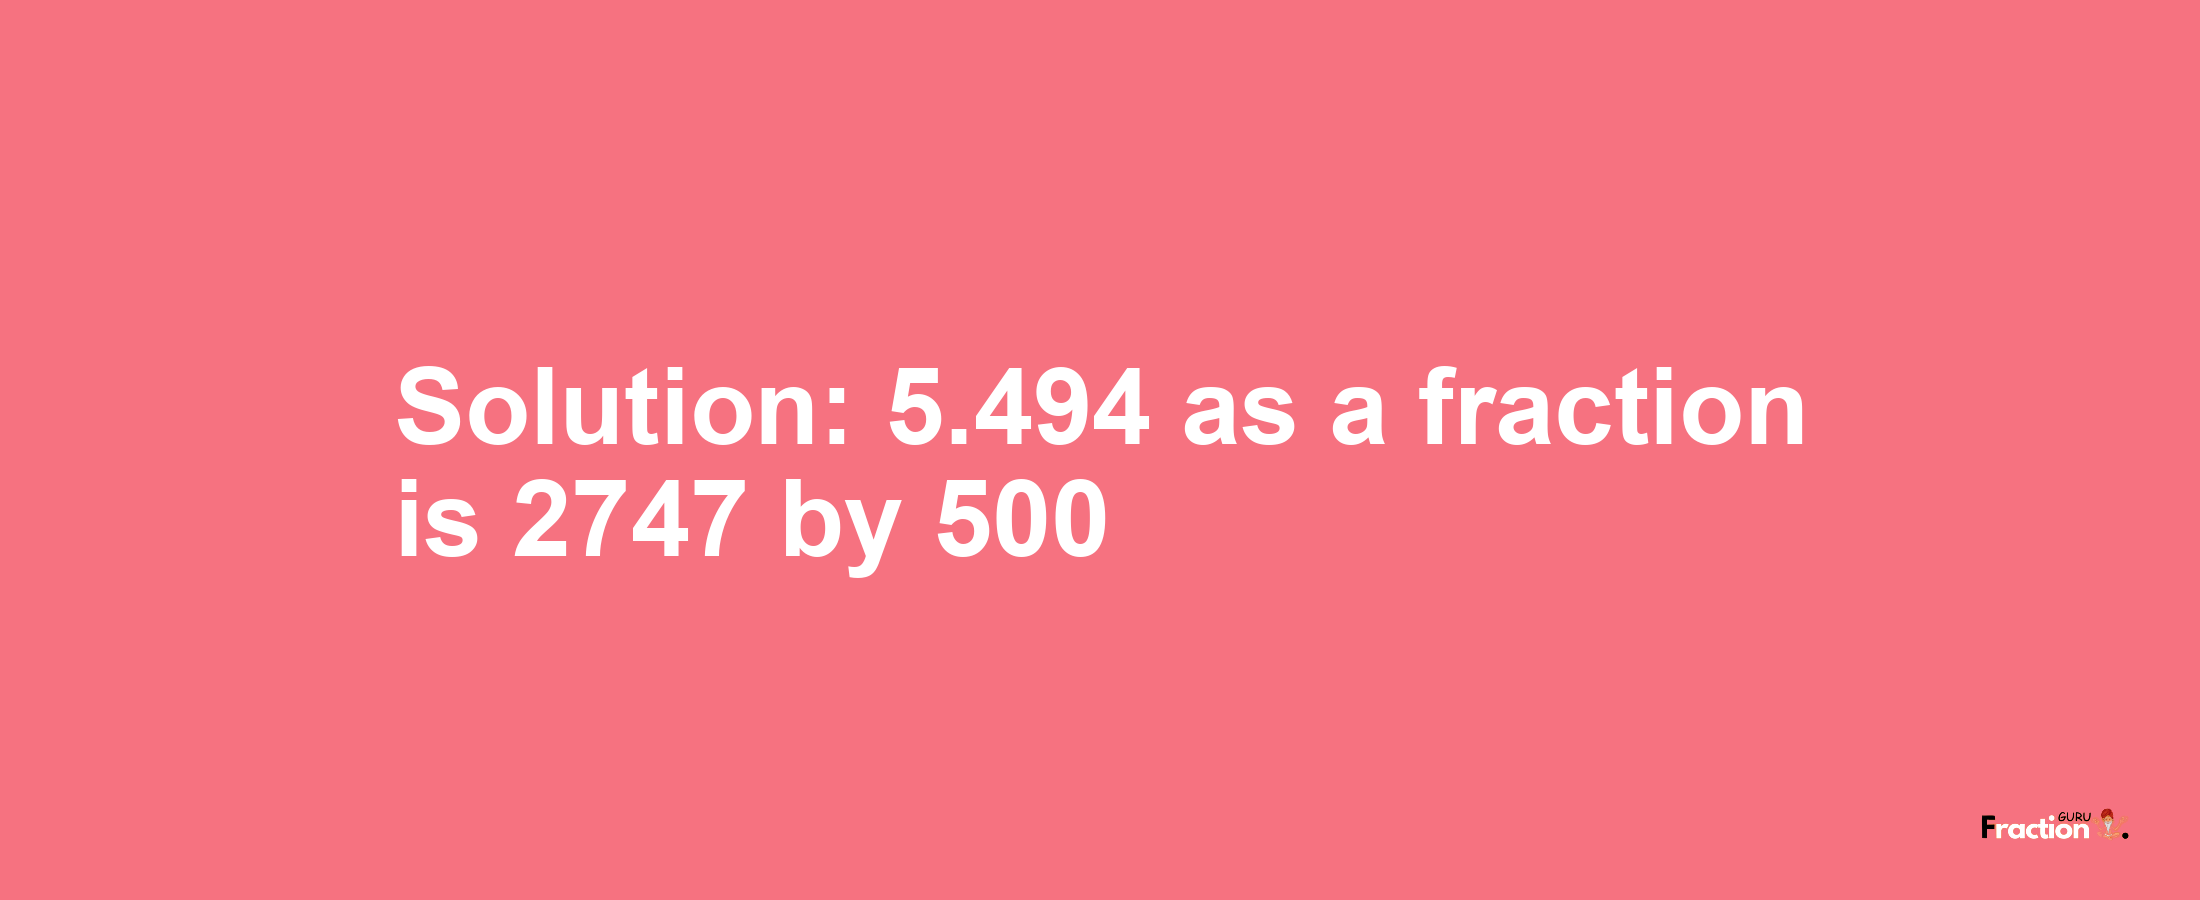 Solution:5.494 as a fraction is 2747/500